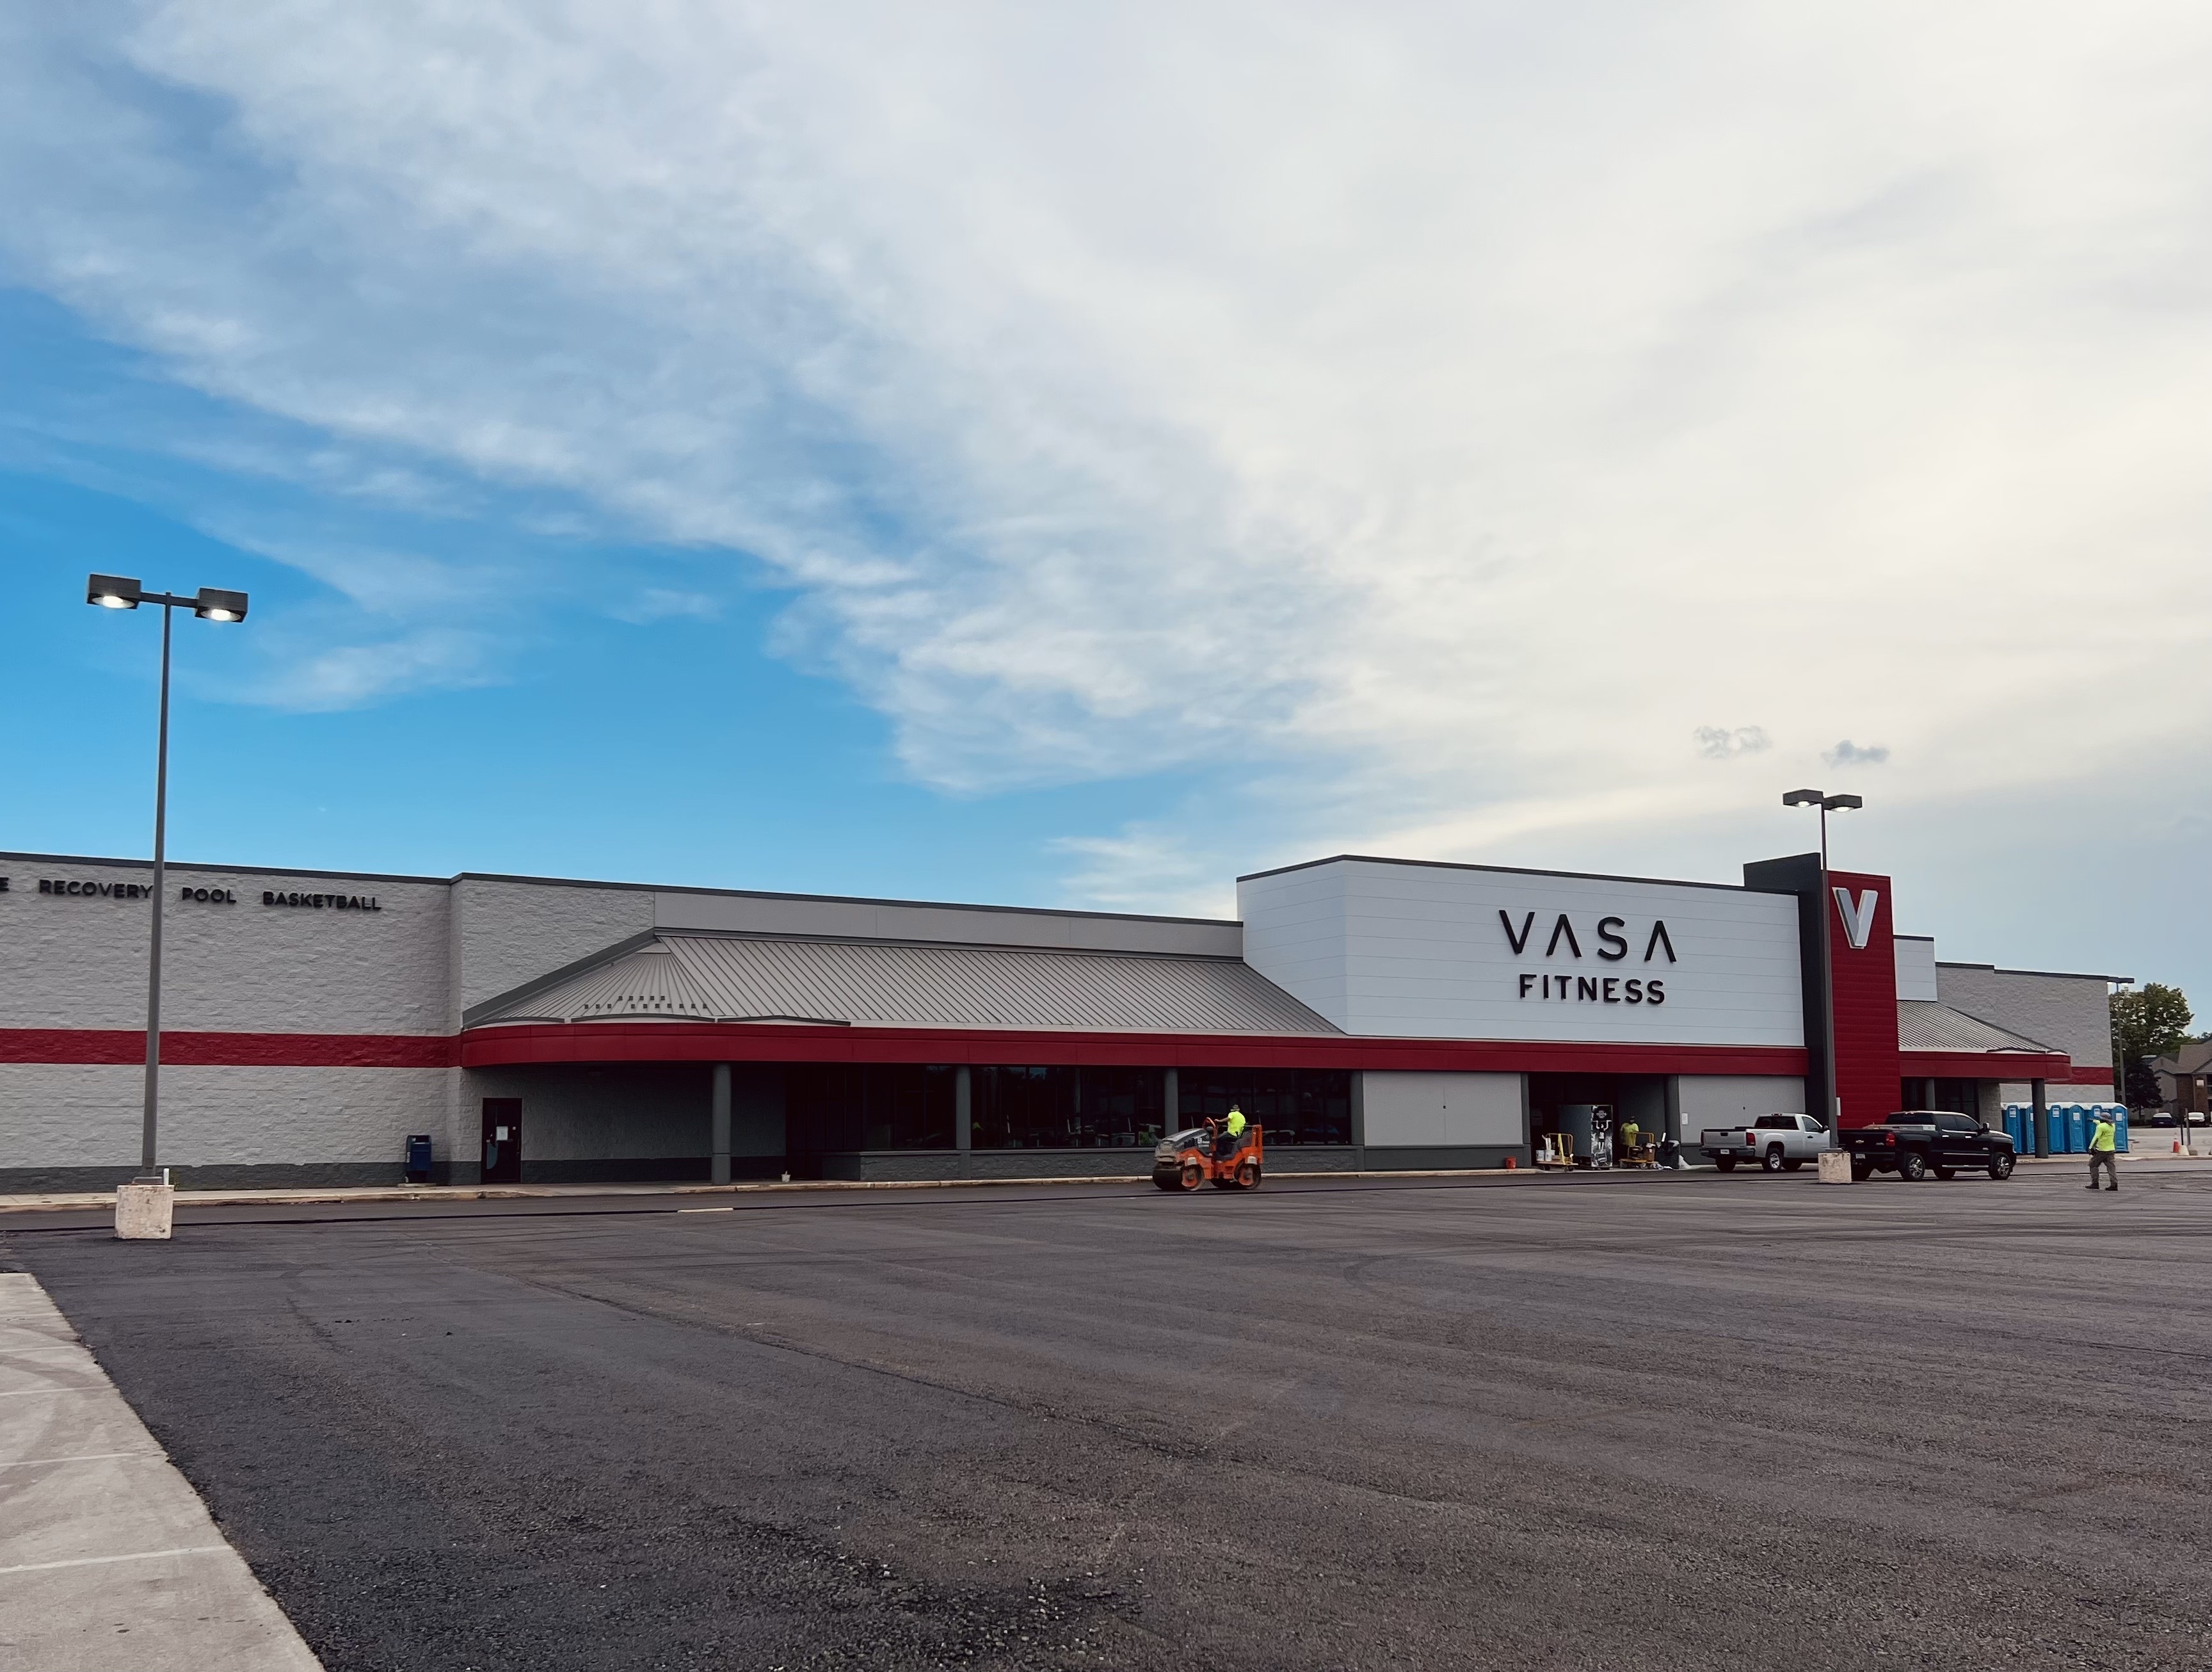 VASA FITNESS OPENS NEW LOCATION IN INDIANAPOLIS AUGUST 6 VASA Fitness